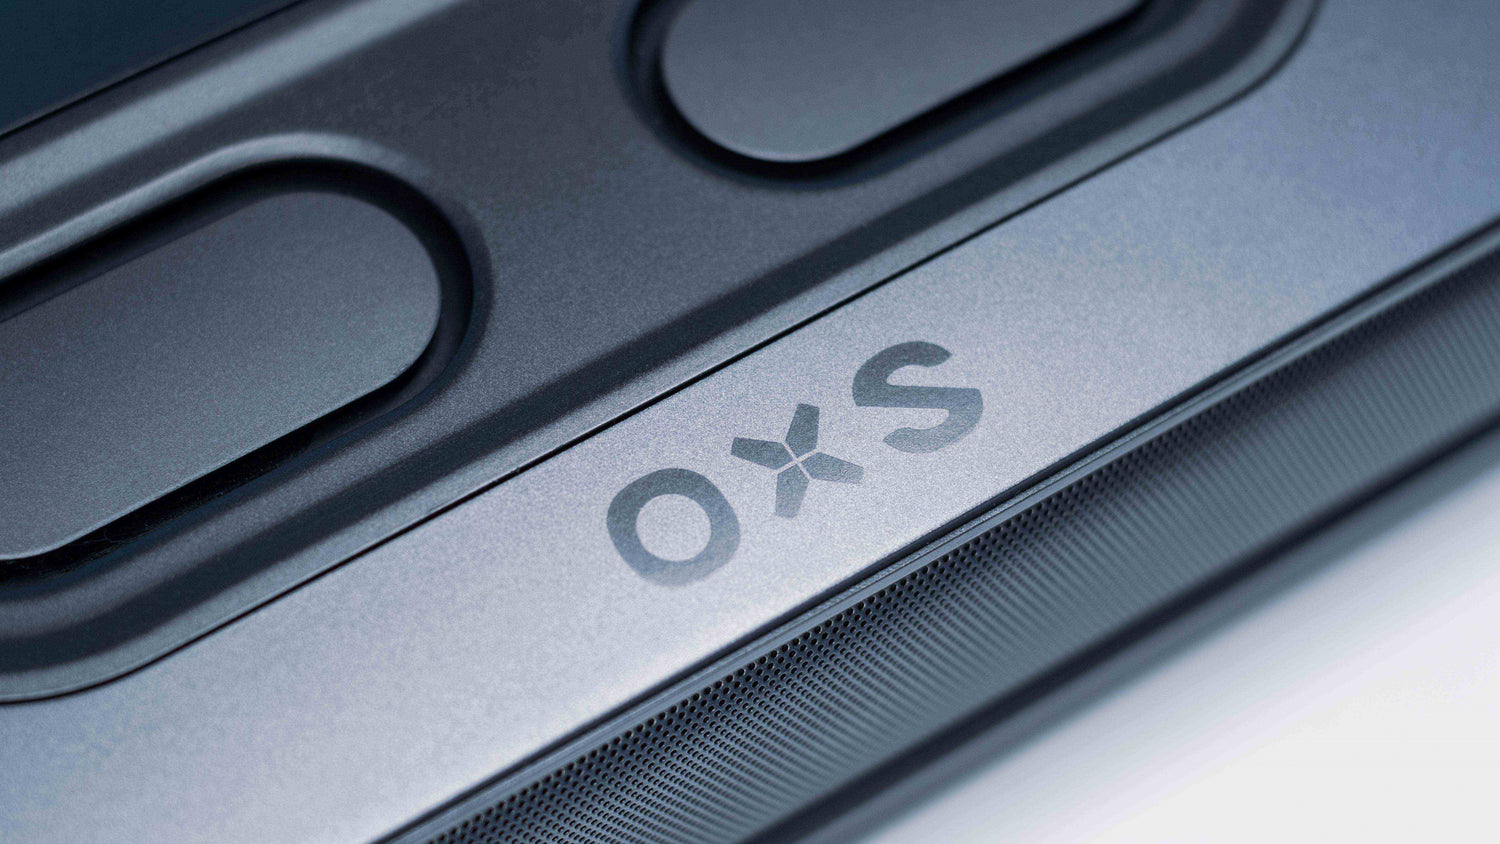 Everything you need to know about OXS subwoofer